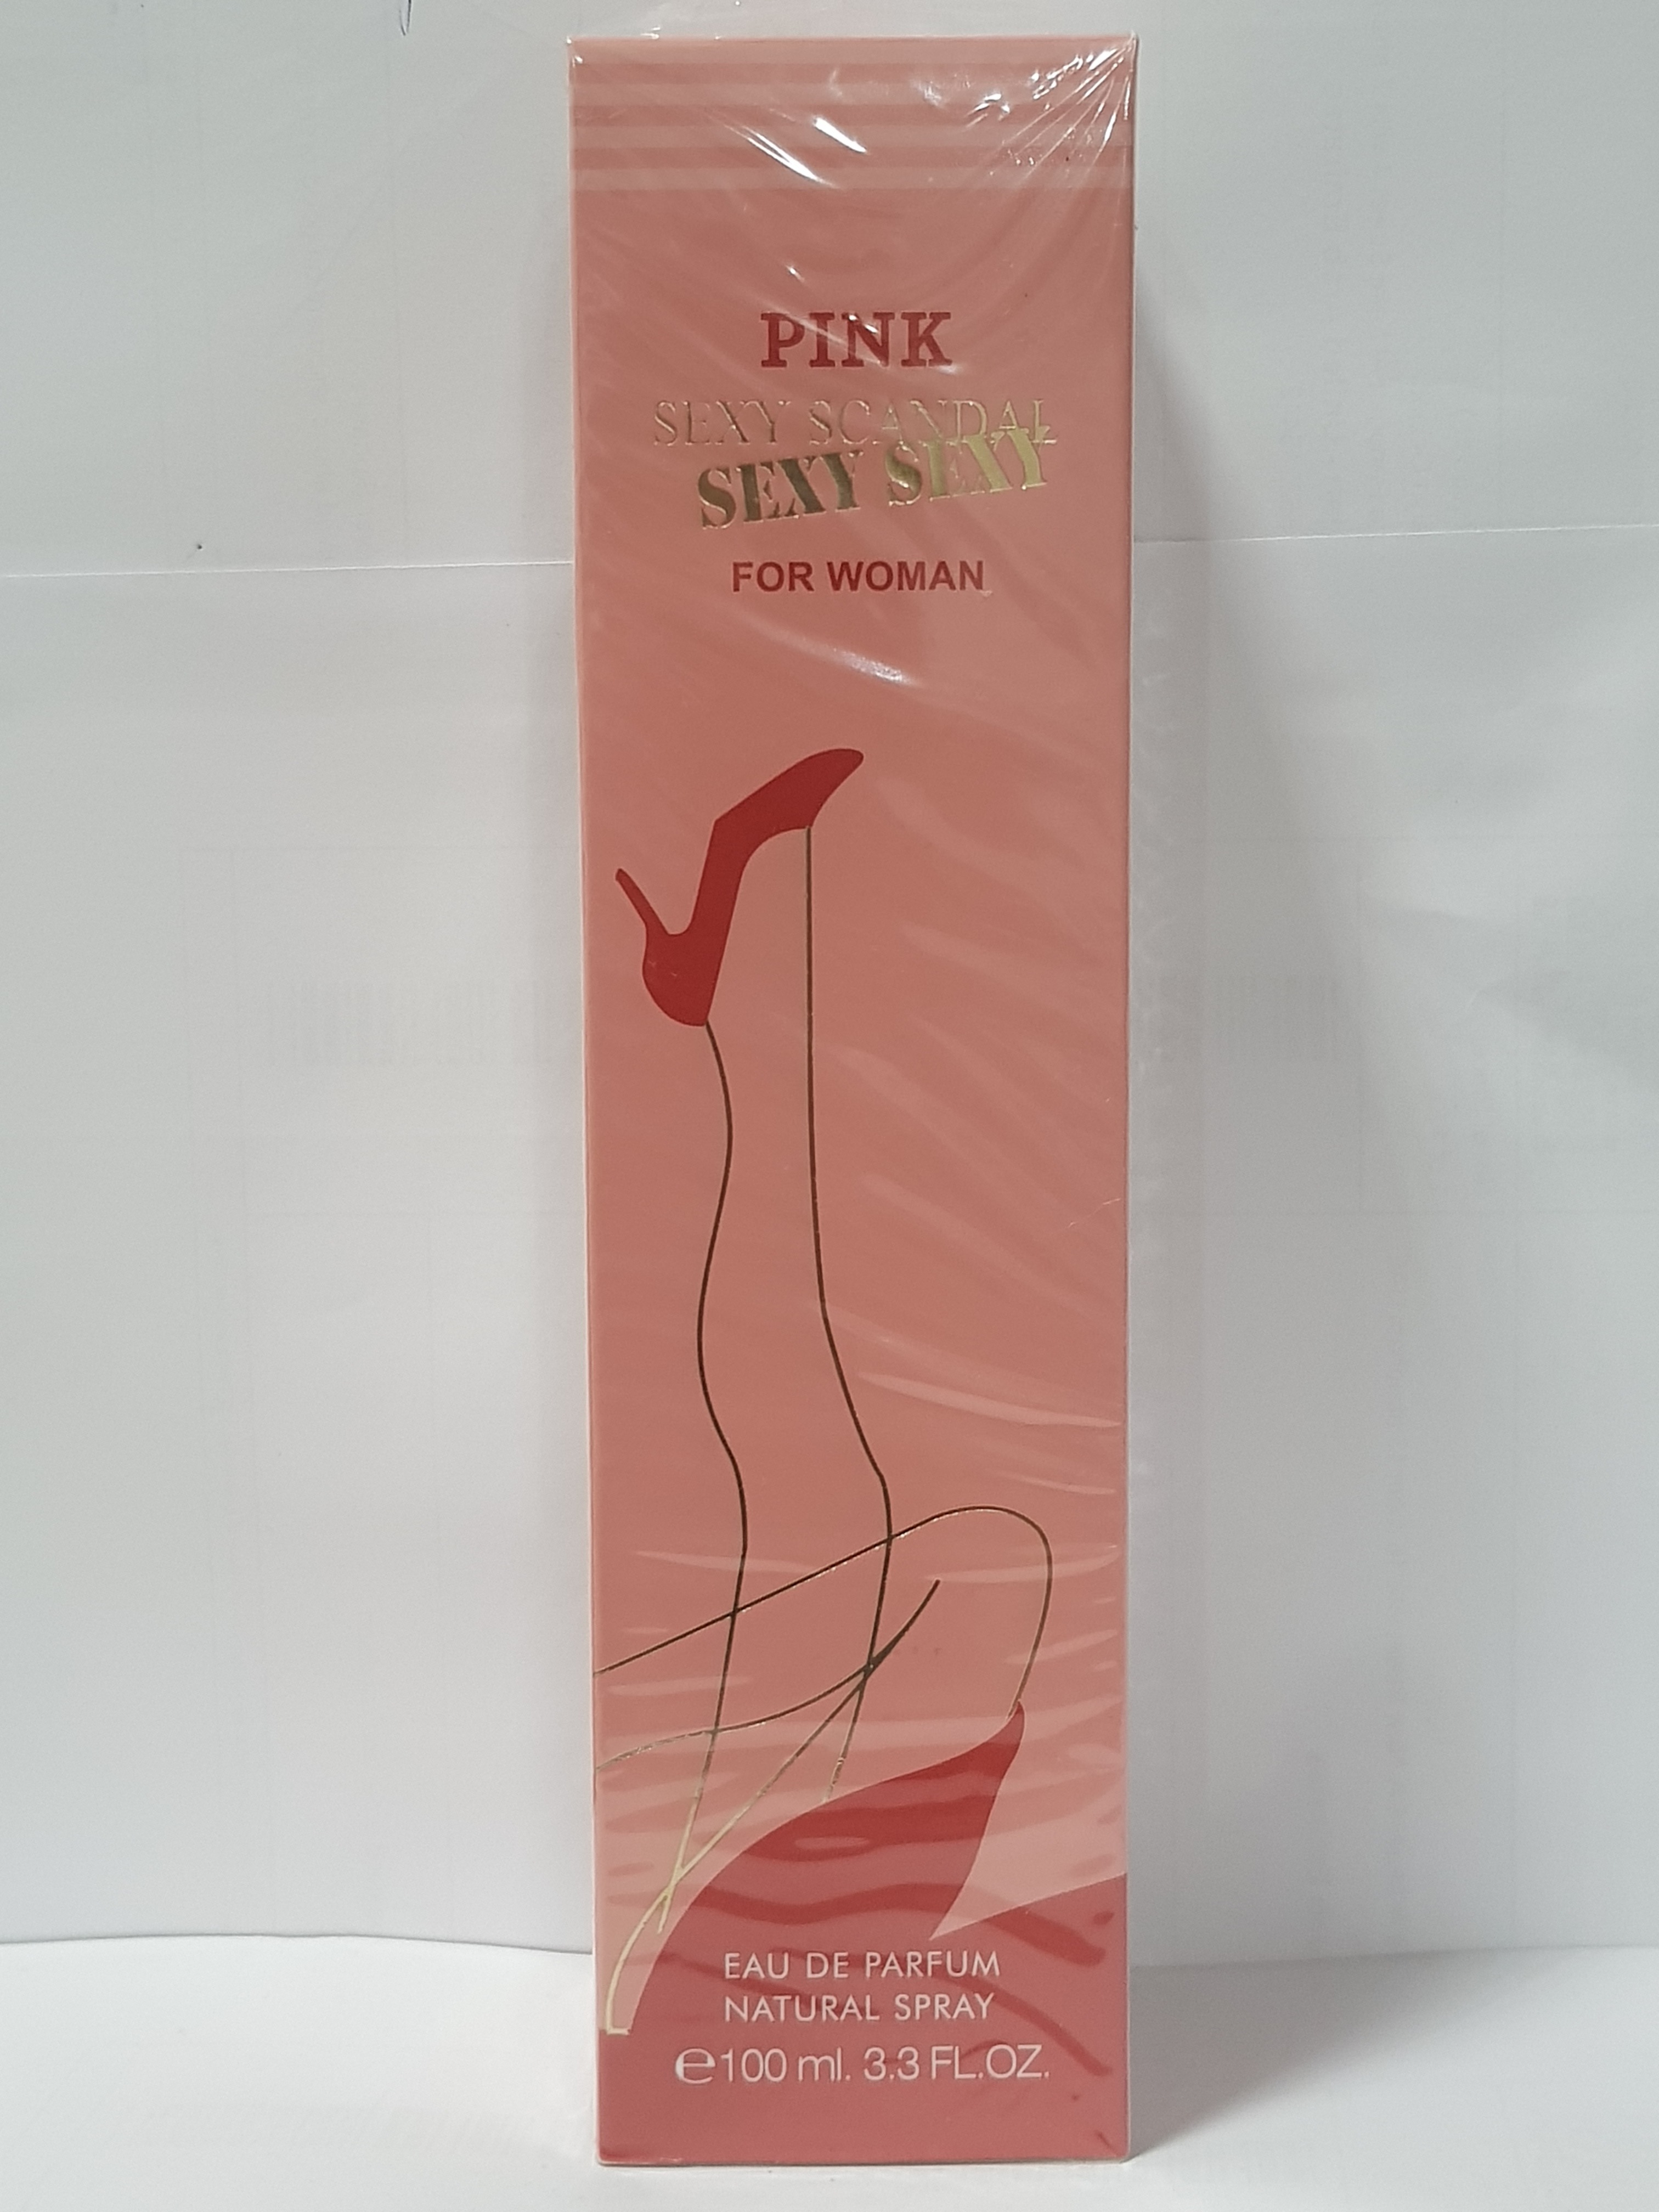 PINK SEXY SCANDAL SEXY SEXY FOR WOMAN PARFUM NATURAL SPRAY (100ml)